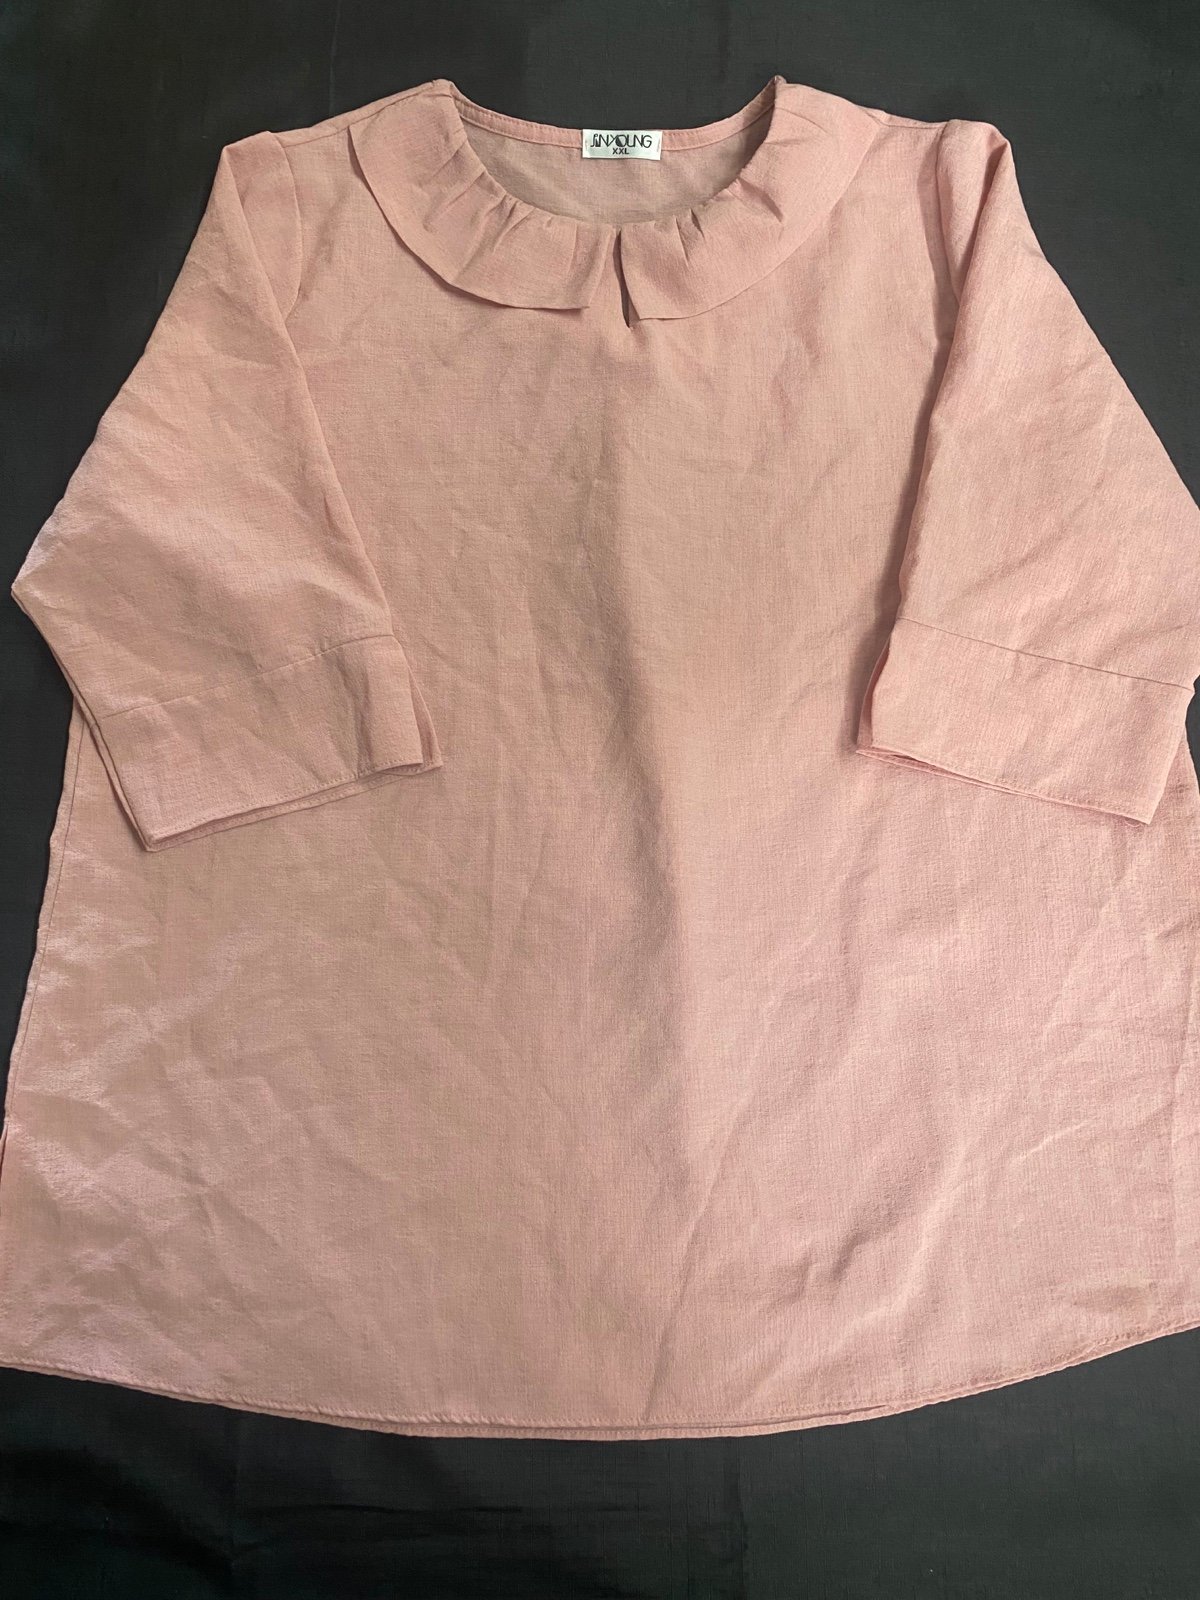 Exclusive JNYOUNG Pink Women Blouse hQHde4FgG Online Exclusive